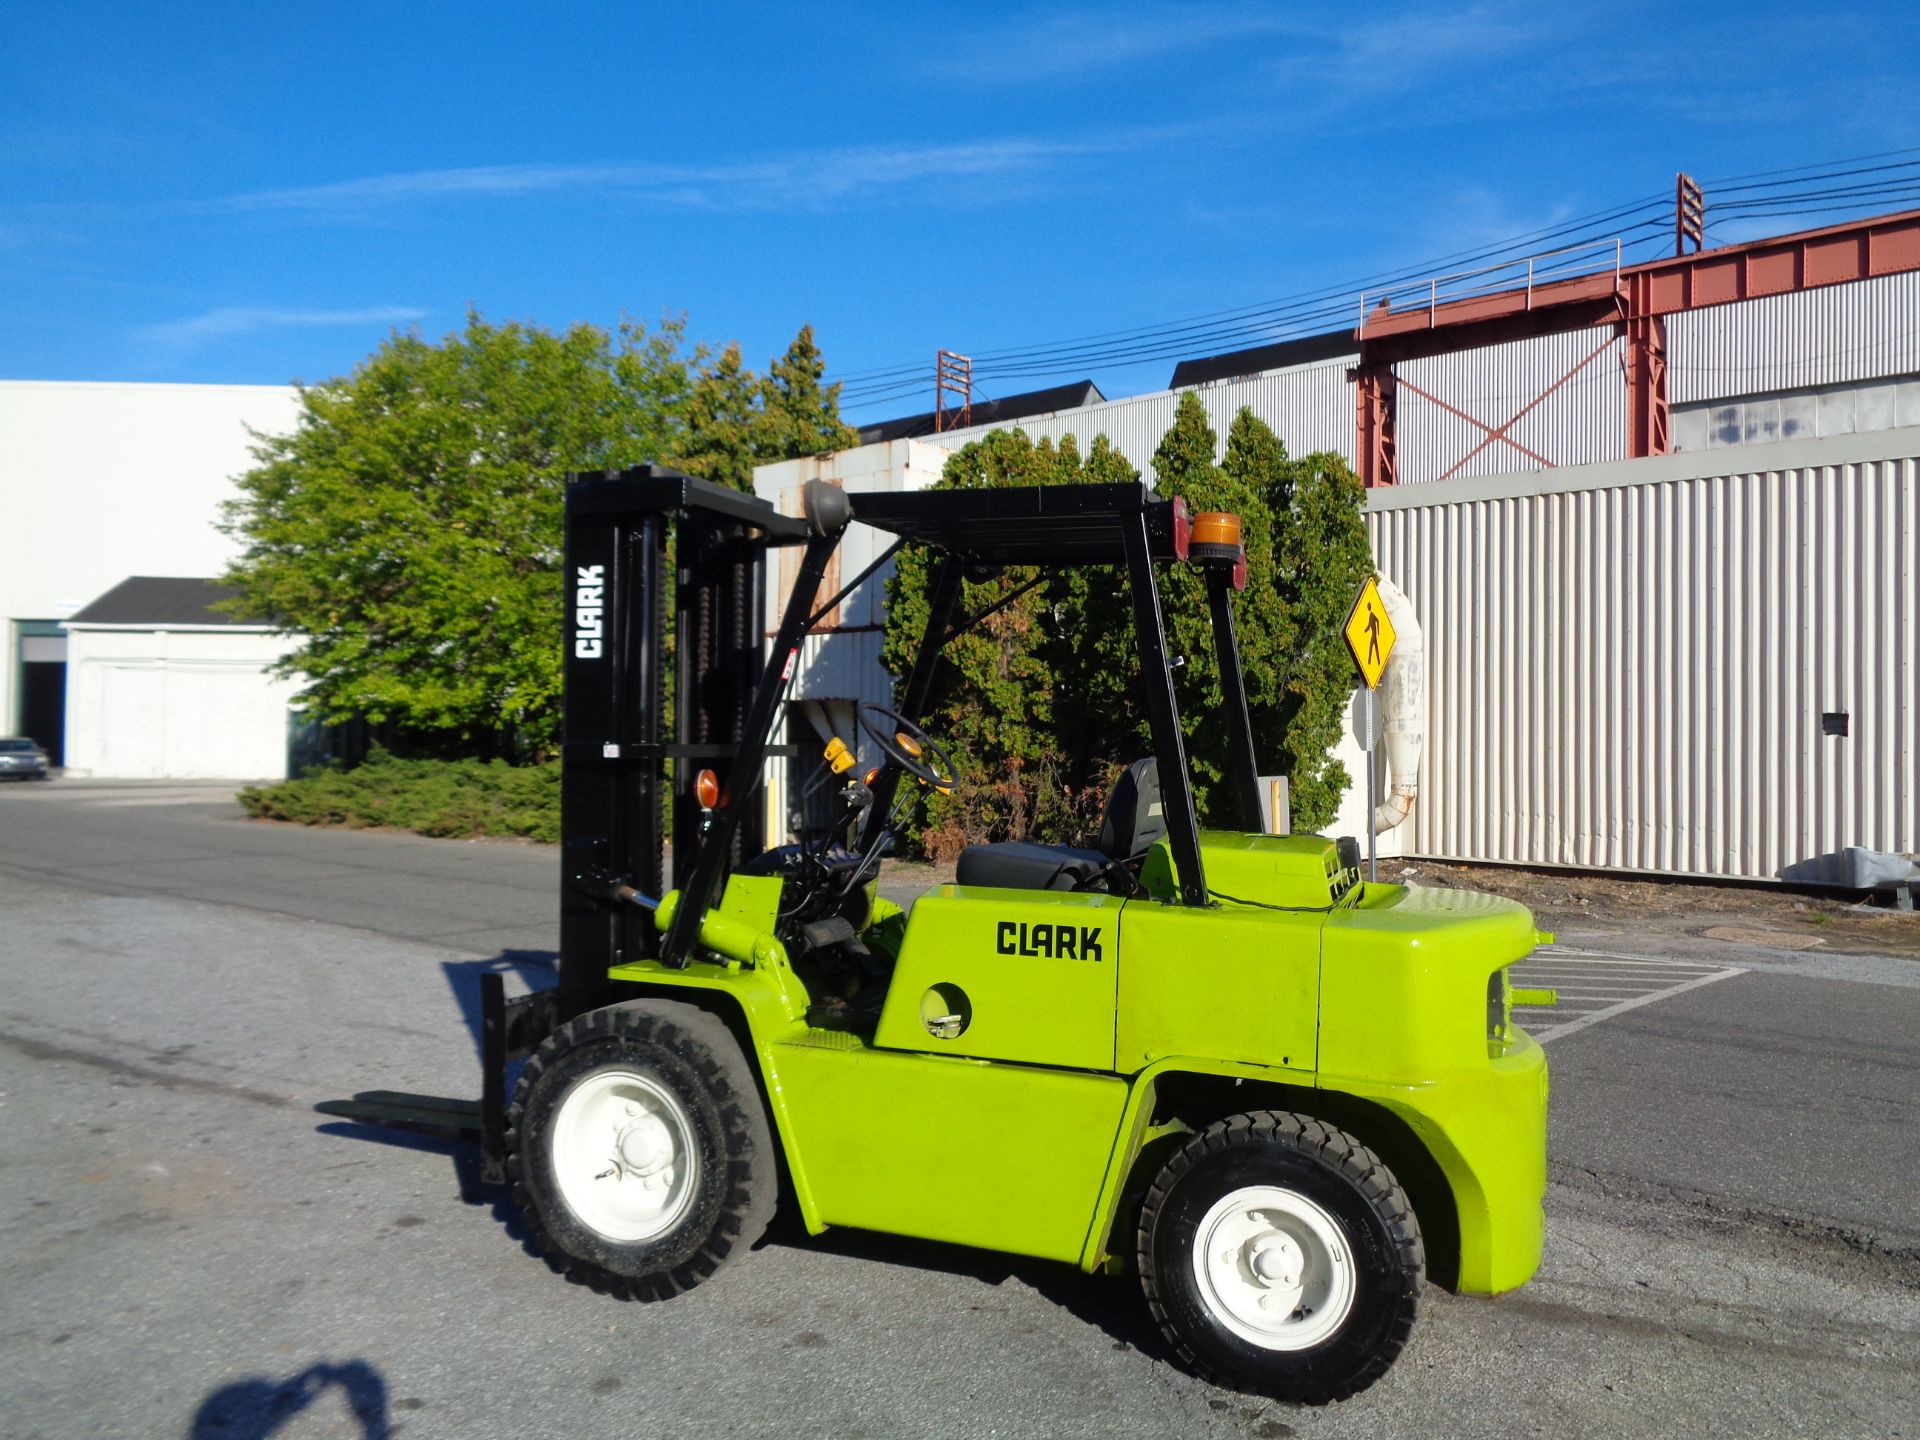 Clark C500-YS80 8,000 LBS Pneumatic Forklift - Image 11 of 11